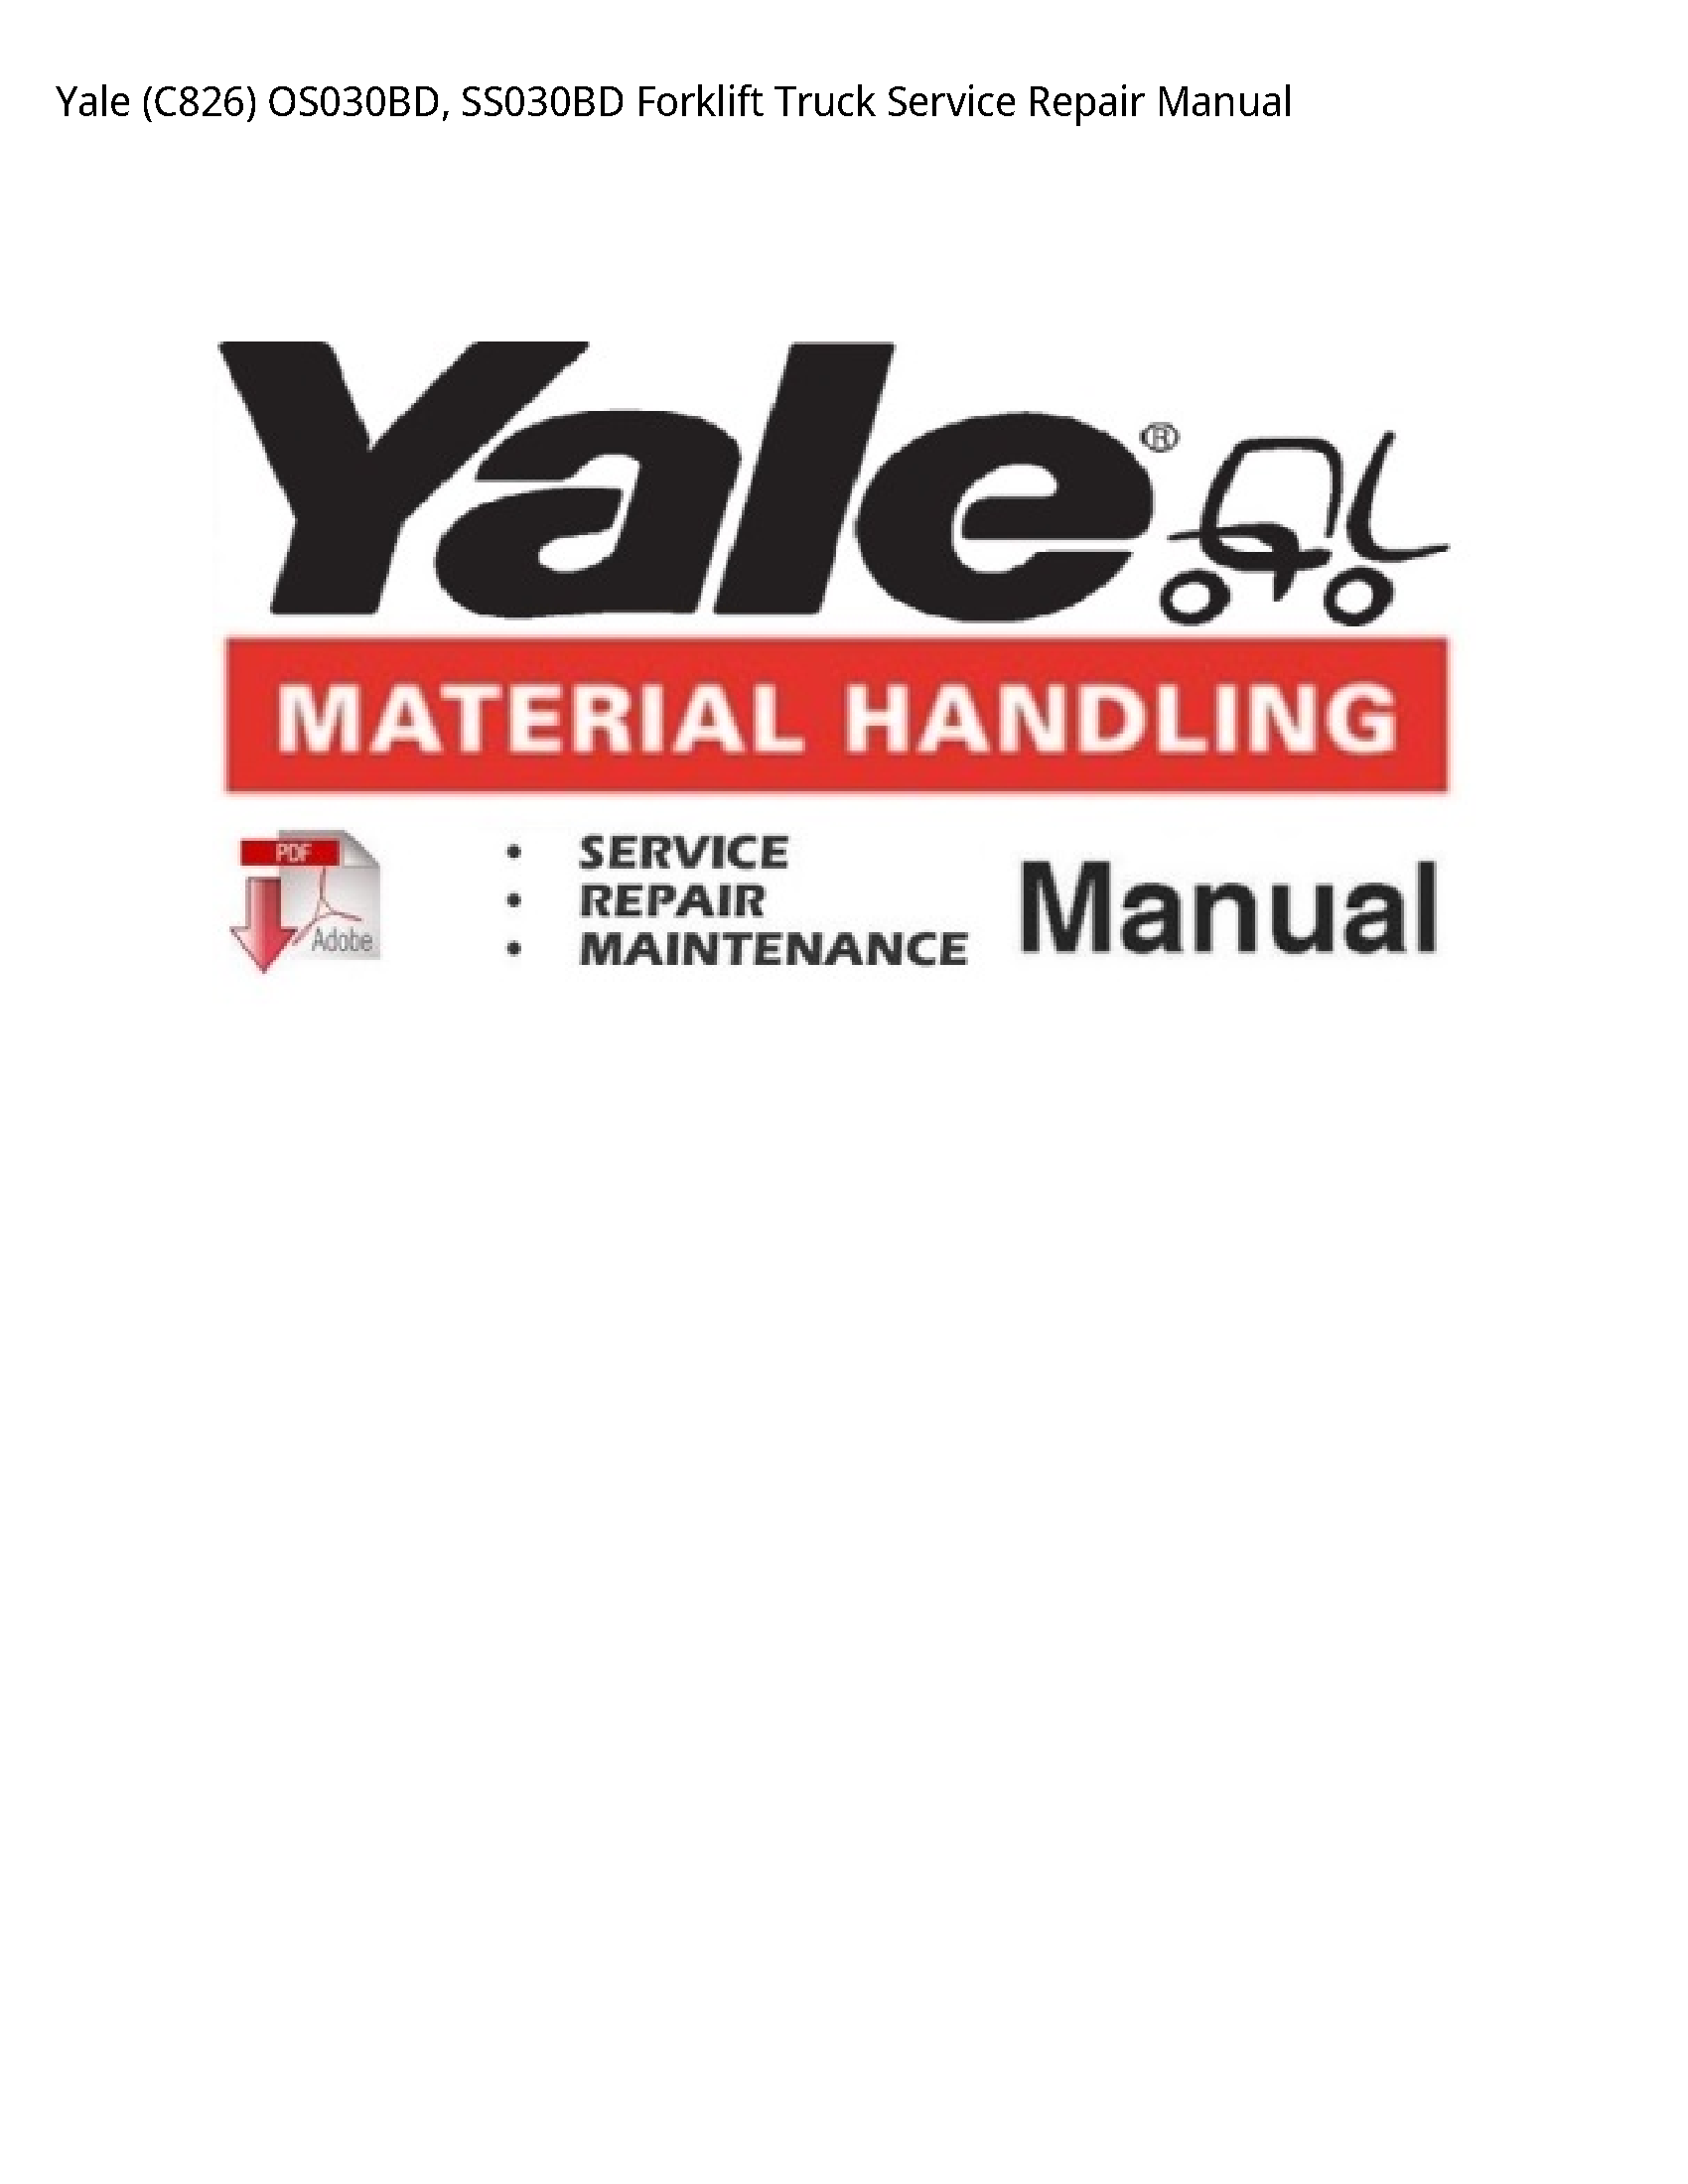 Yale (C826) Forklift Truck manual